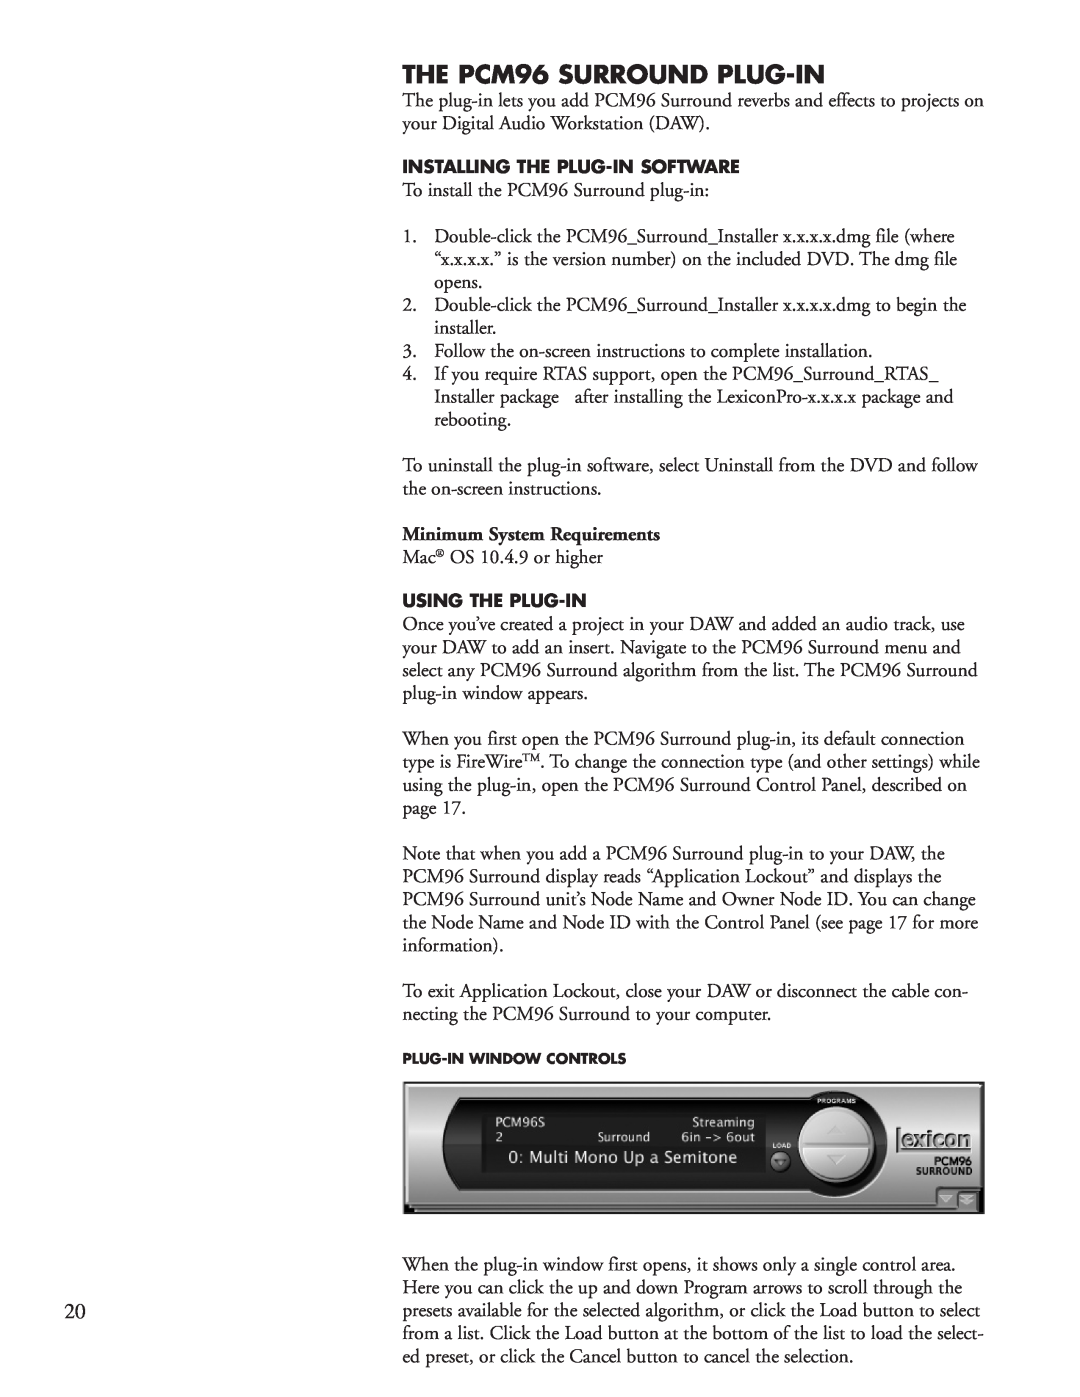 Lexicon manual The PCM96 Surround Plug-IN, Minimum System Requirements 